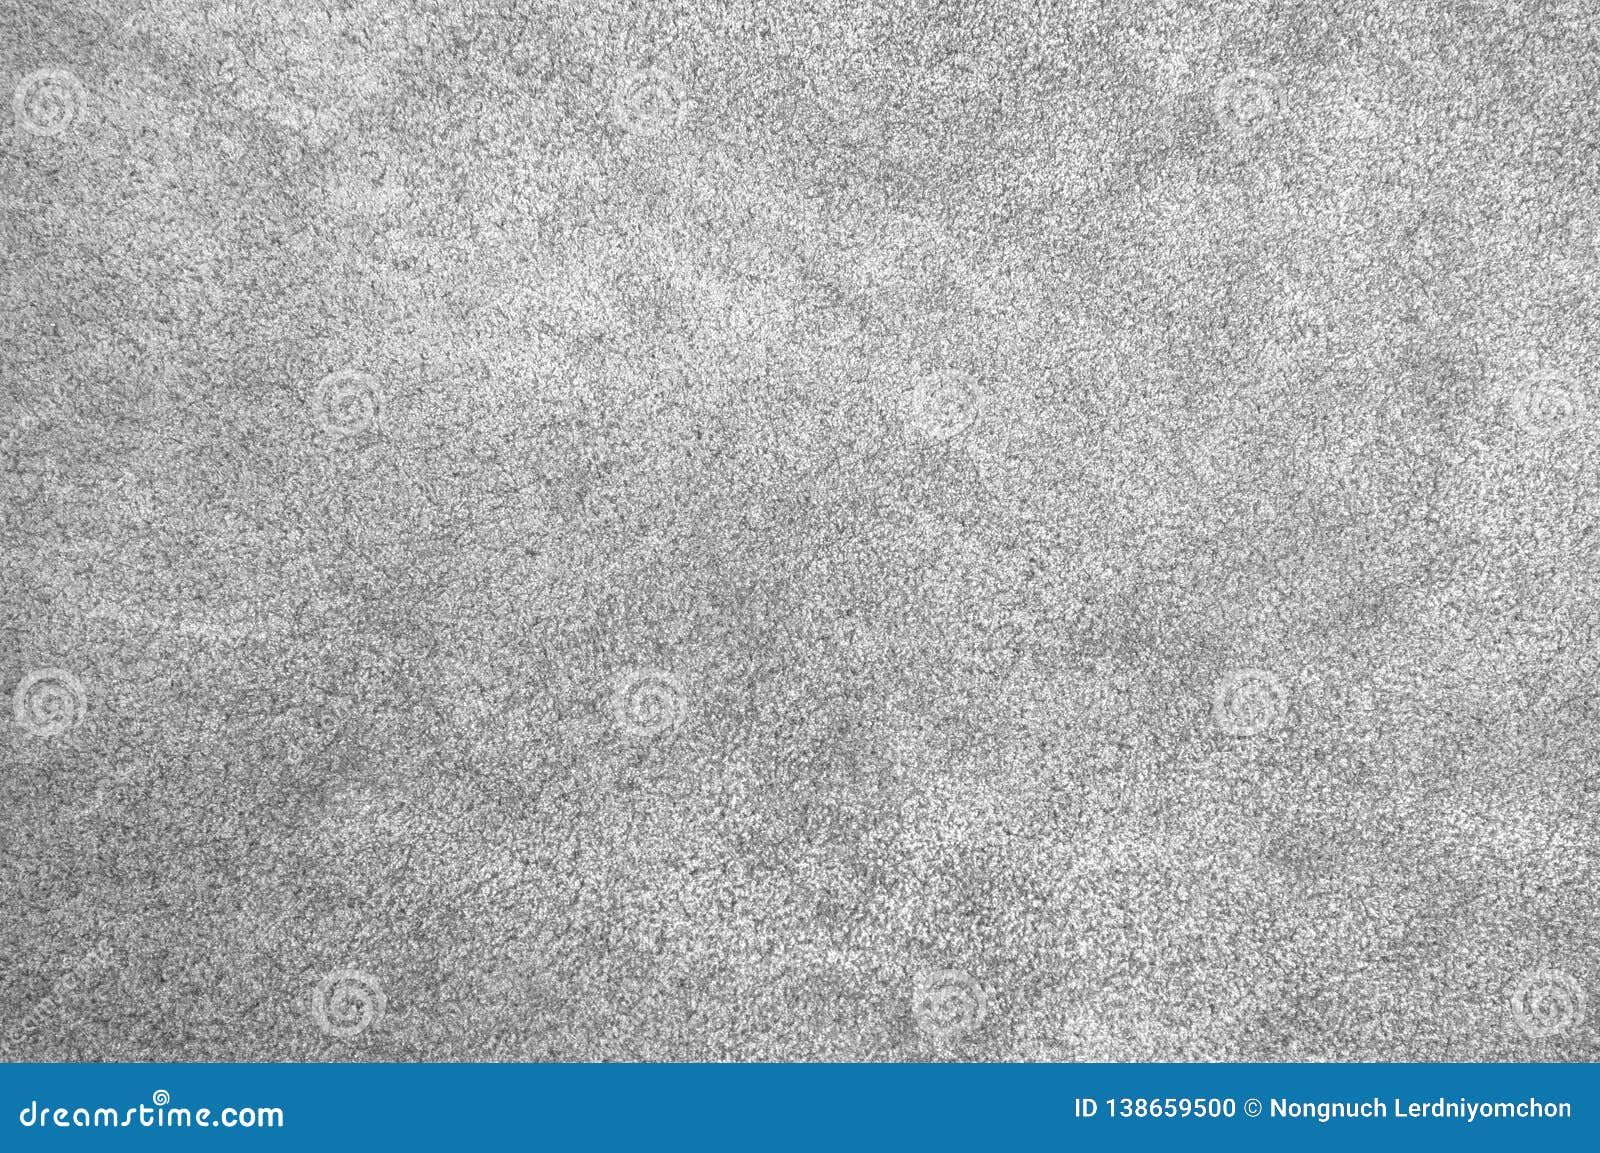 Texture Of Grey Wrinkled Velvet Fabric For Background Stock Photo, Picture  and Royalty Free Image. Image 144804995.